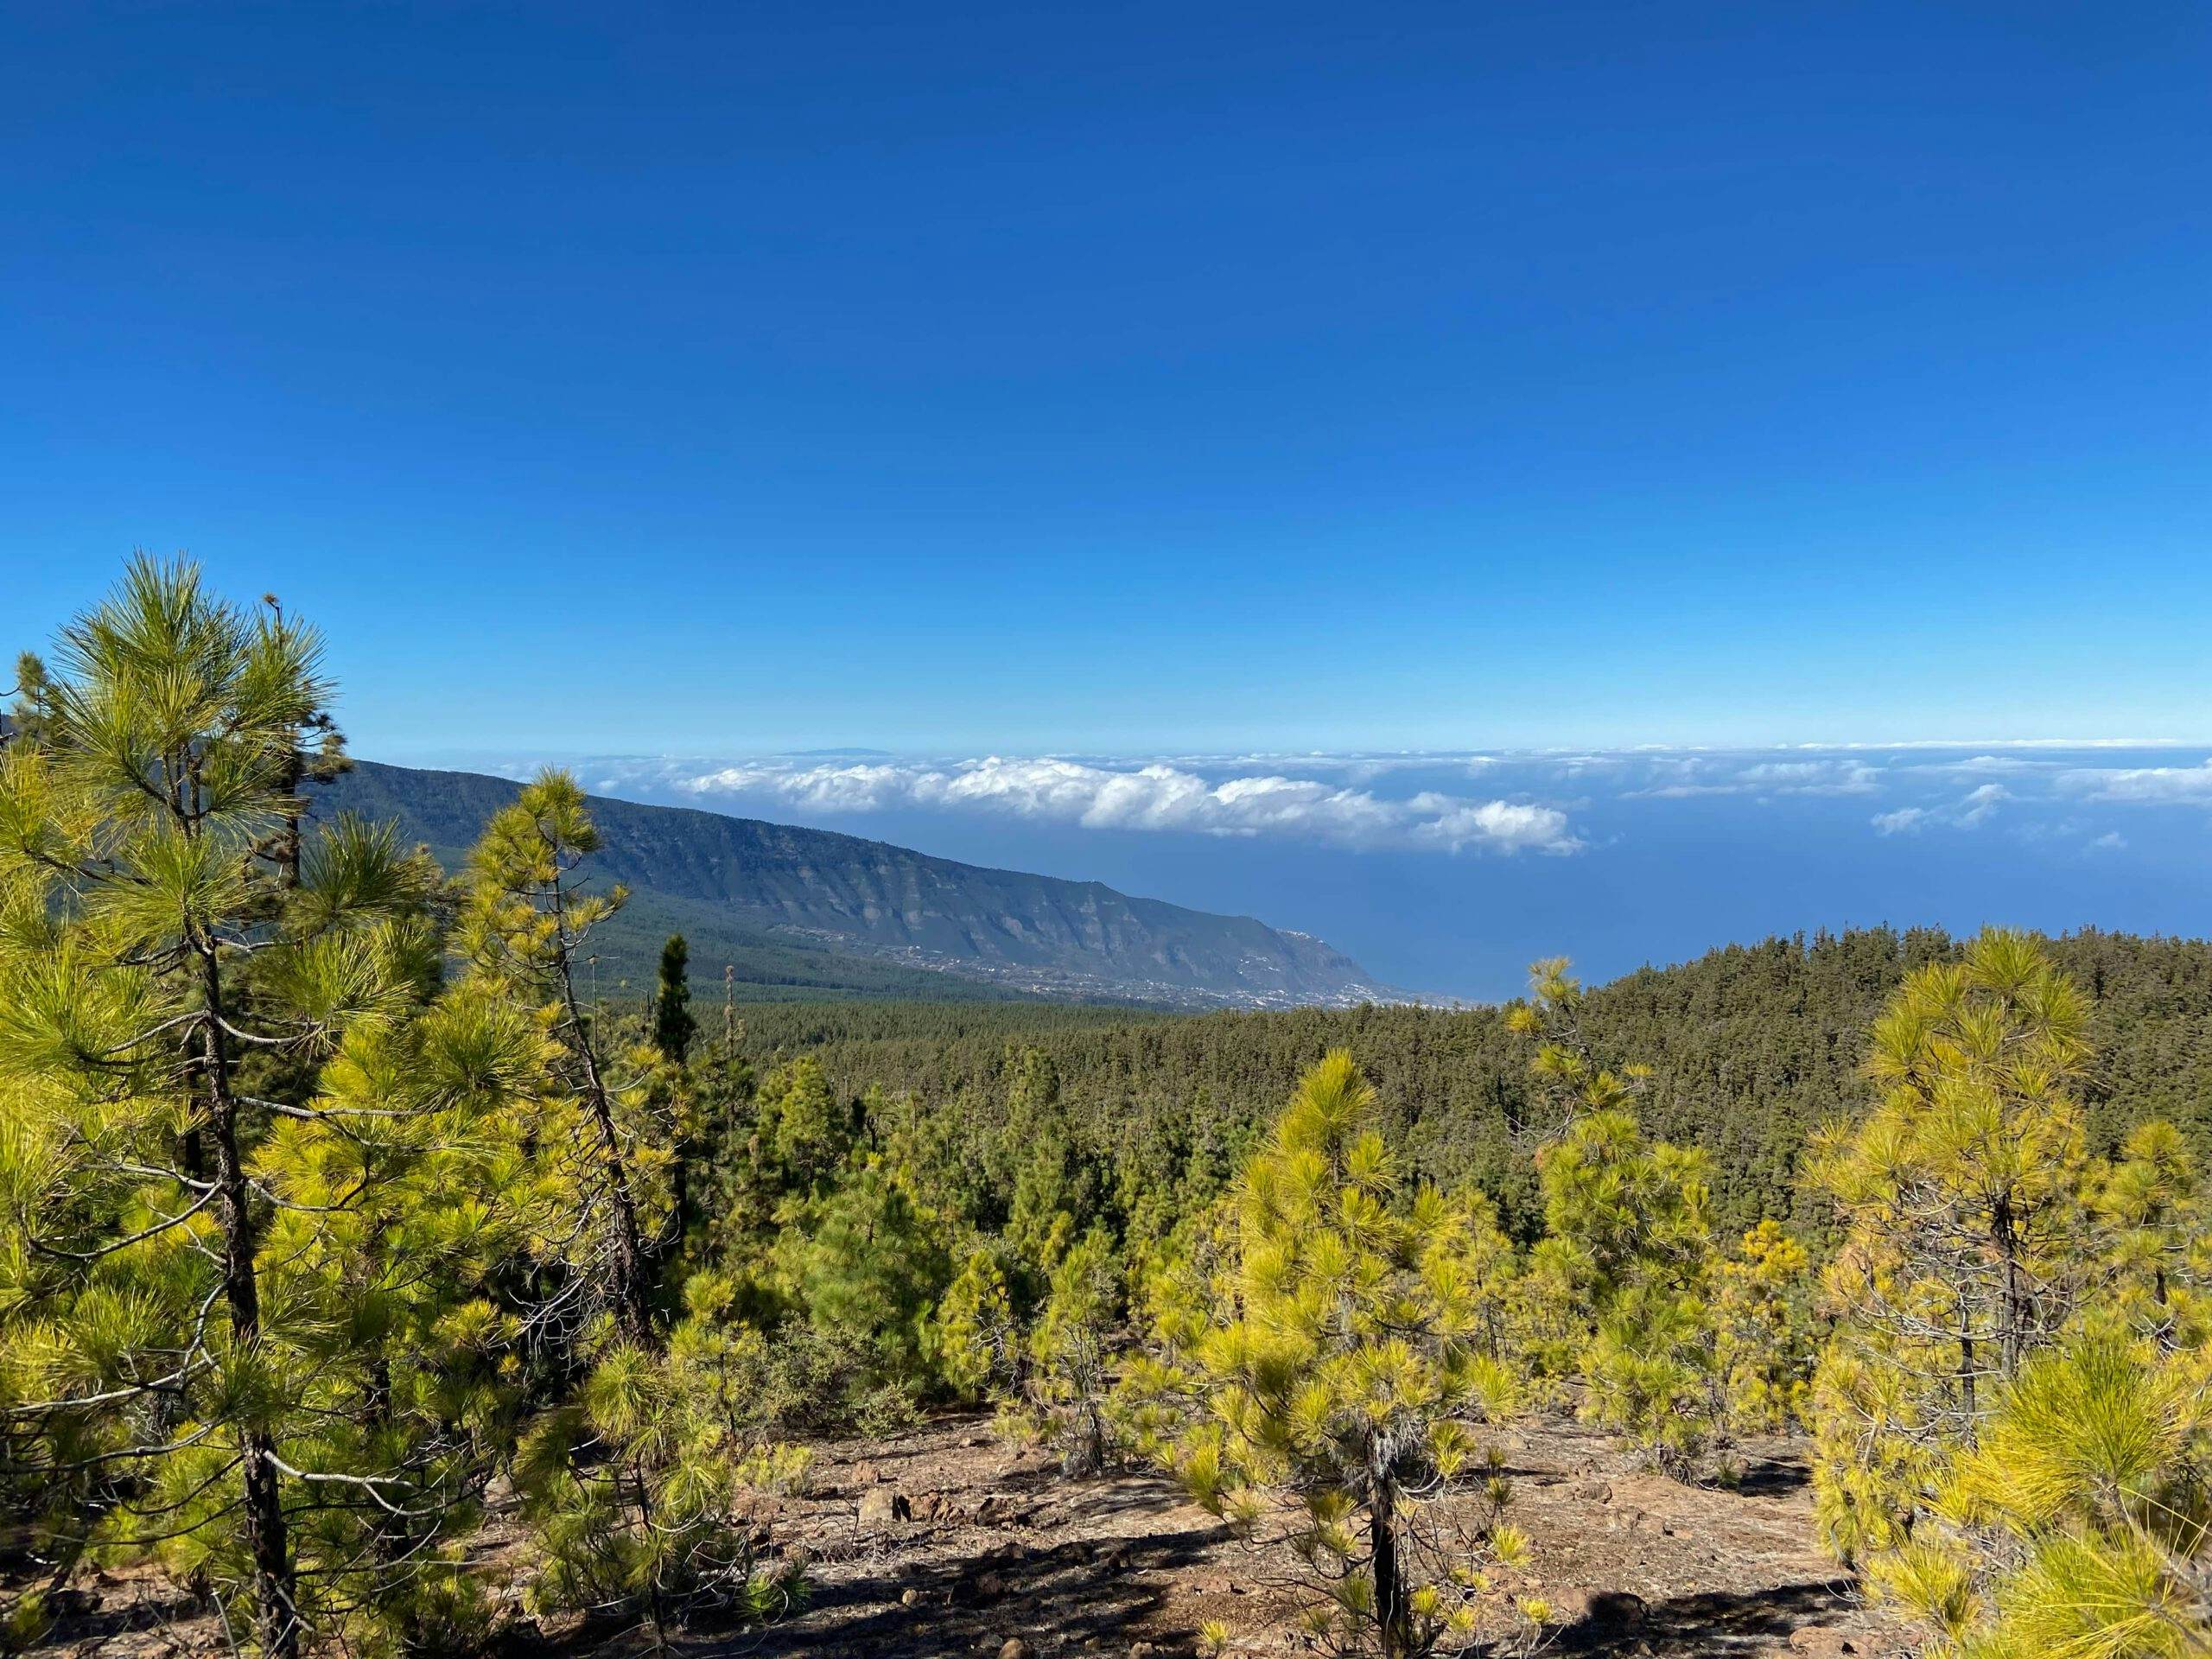 View of the Orotava valley from the Montaña Limón ascent trail